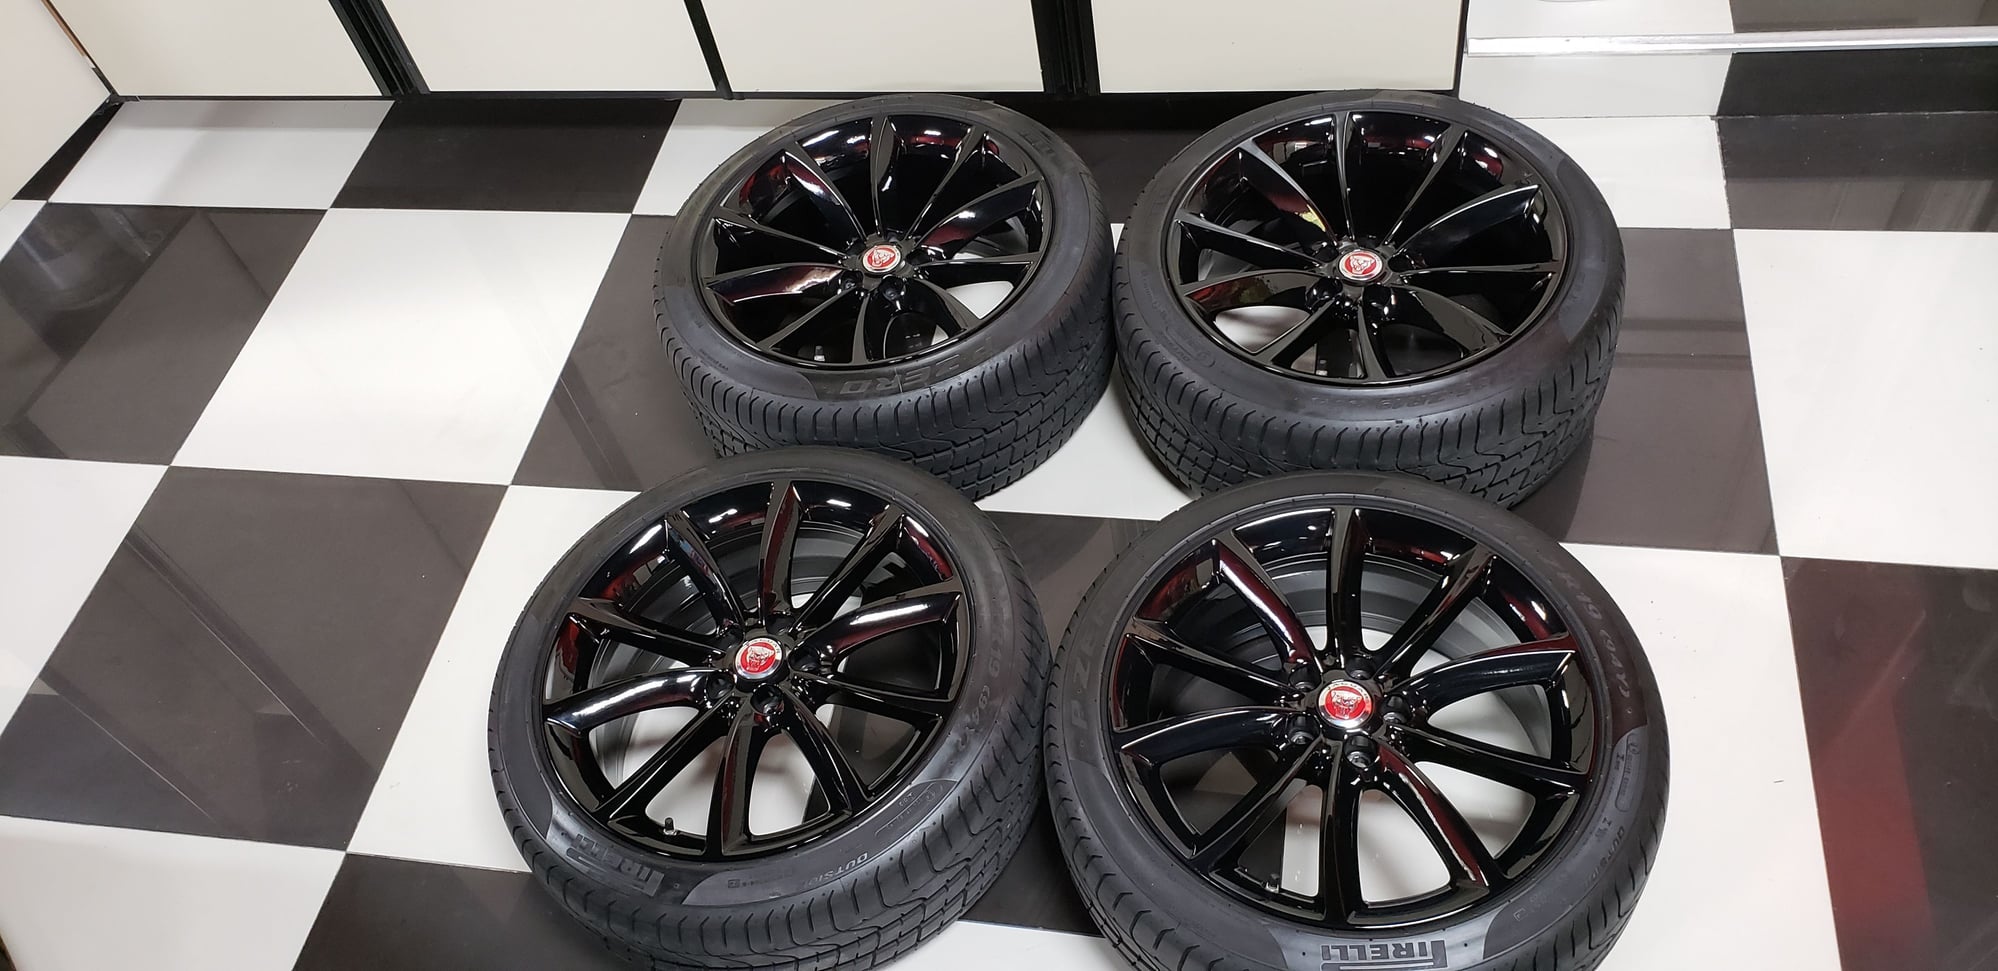 Wheels and Tires/Axles - 19" factory oem jaguar ftype wheels rims and new tires - Used - 2015 to 2018 Jaguar F-Type - Sacramento, CA 95630, United States